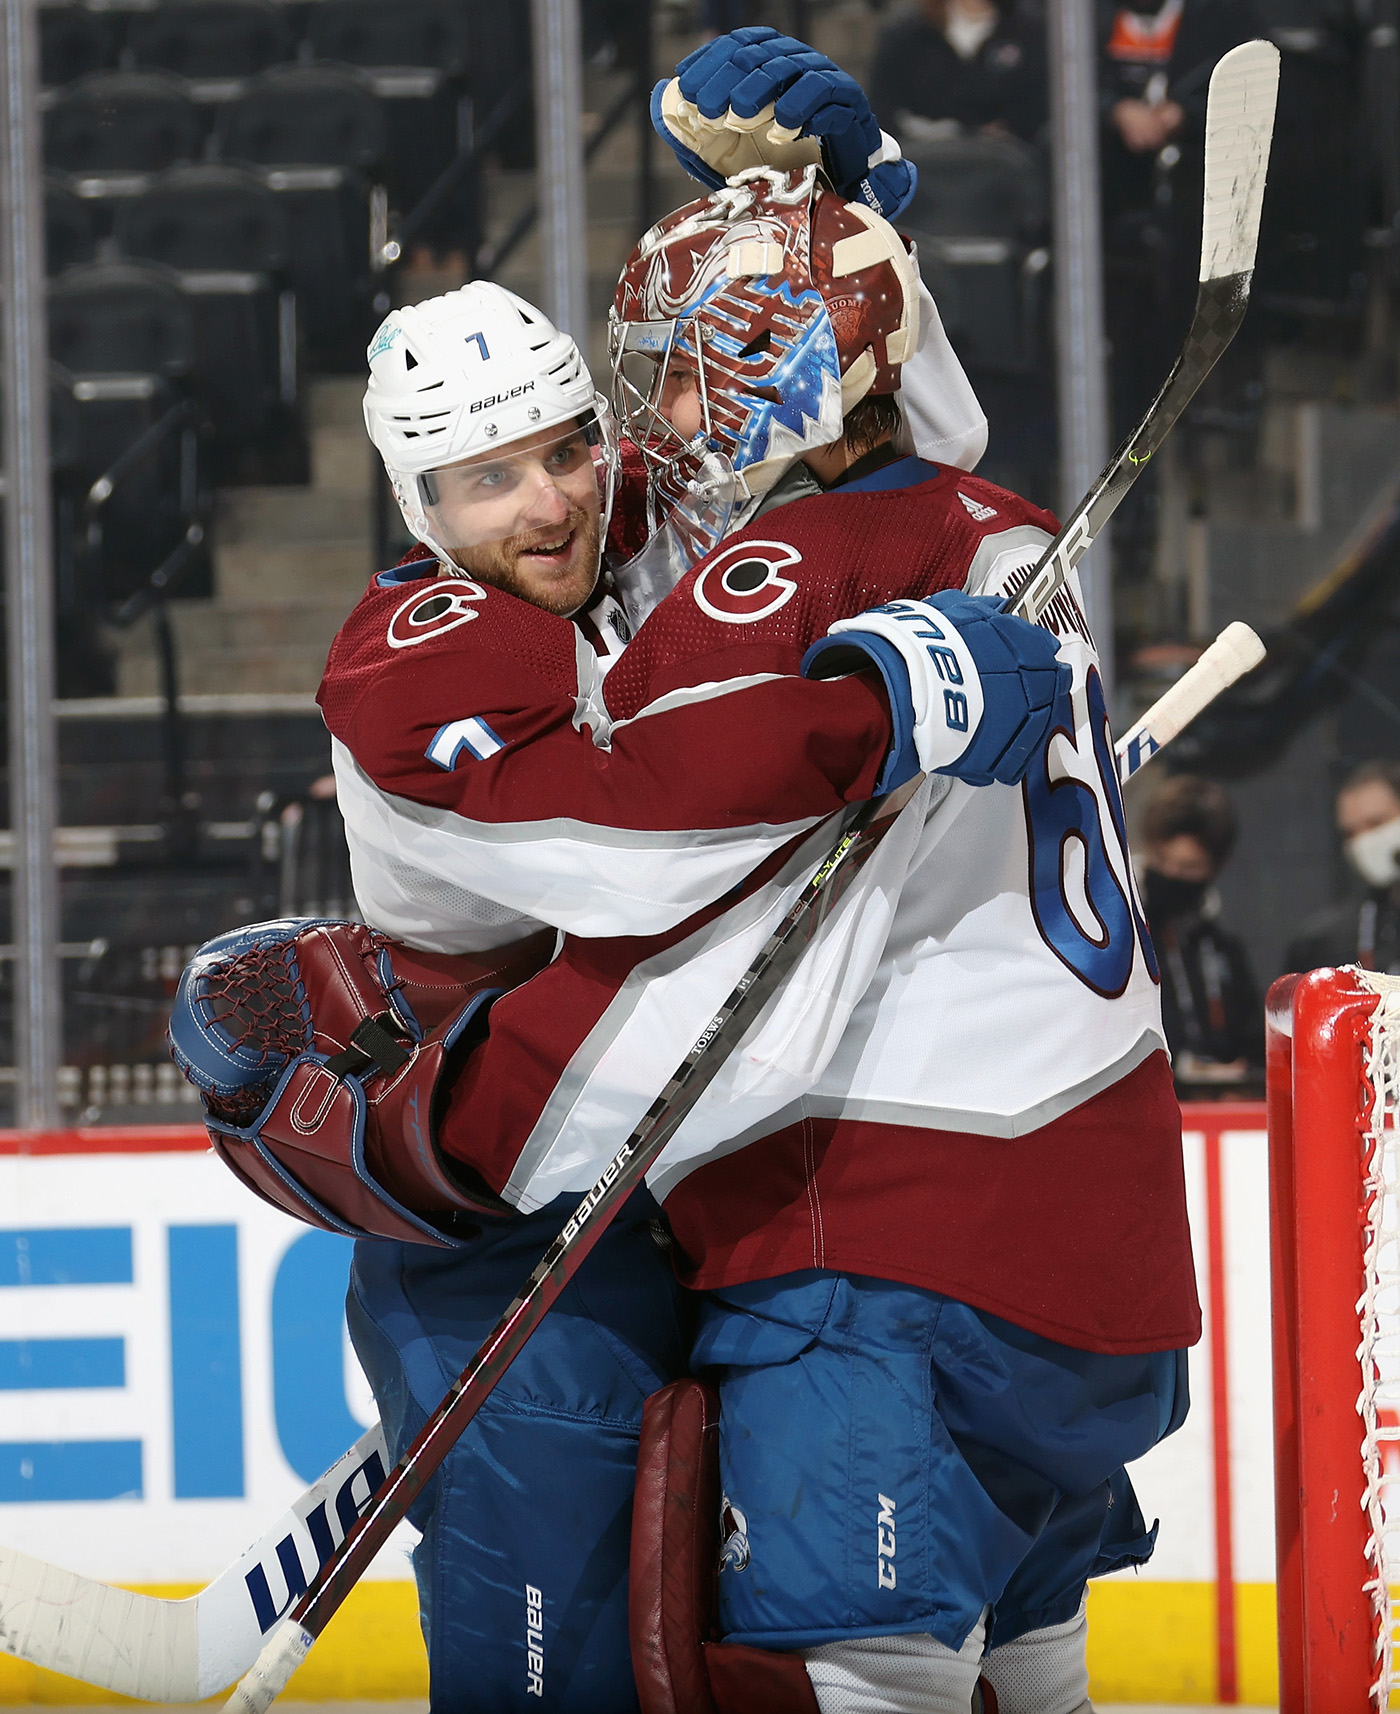 Devon Toews #7 and Justus Annunen #60 of the Colorado Avalanche celebrate after defeating the Philadelphia Flyers 7-5 at the Wells Fargo Center on December 6, 2021 in Philadelphia, Pennsylvania.